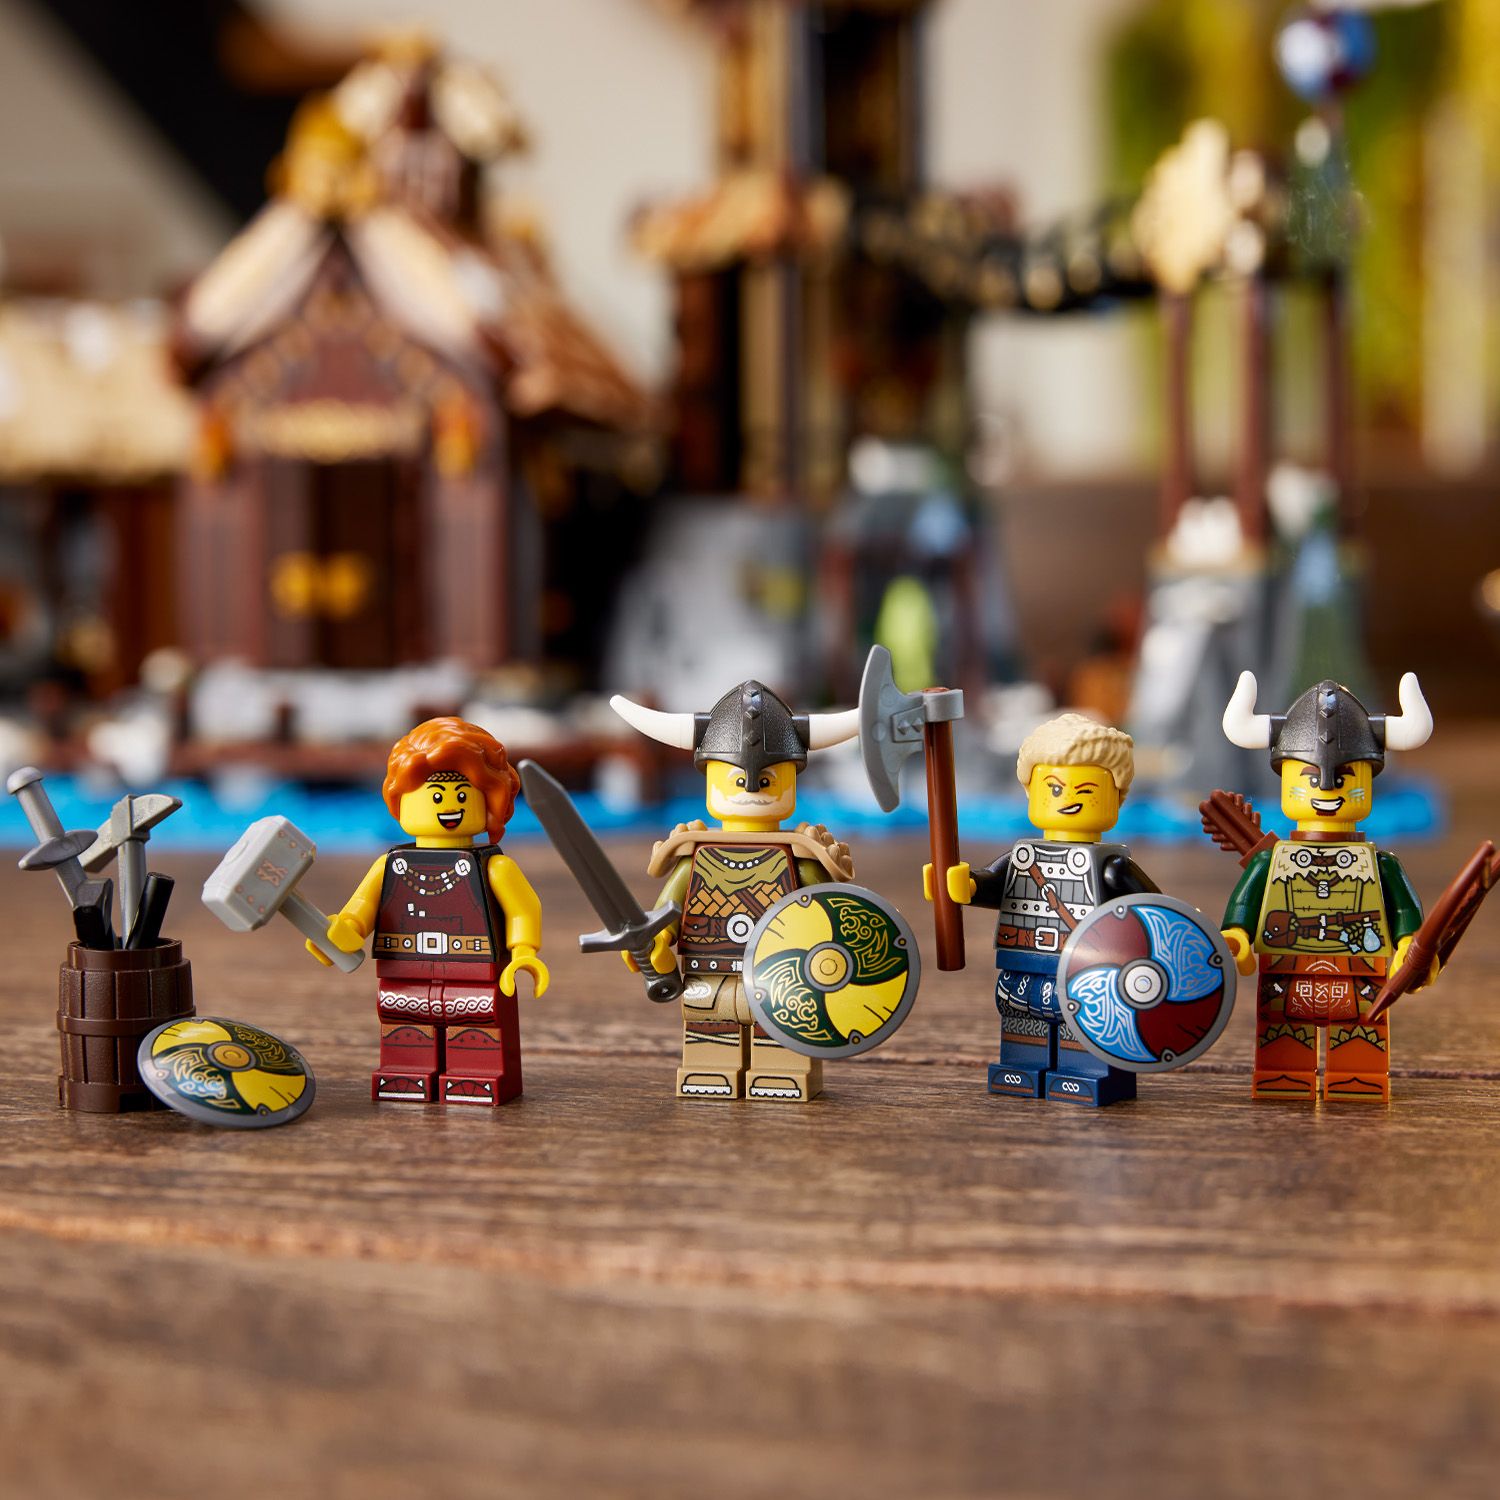 4 minifigures with accessories